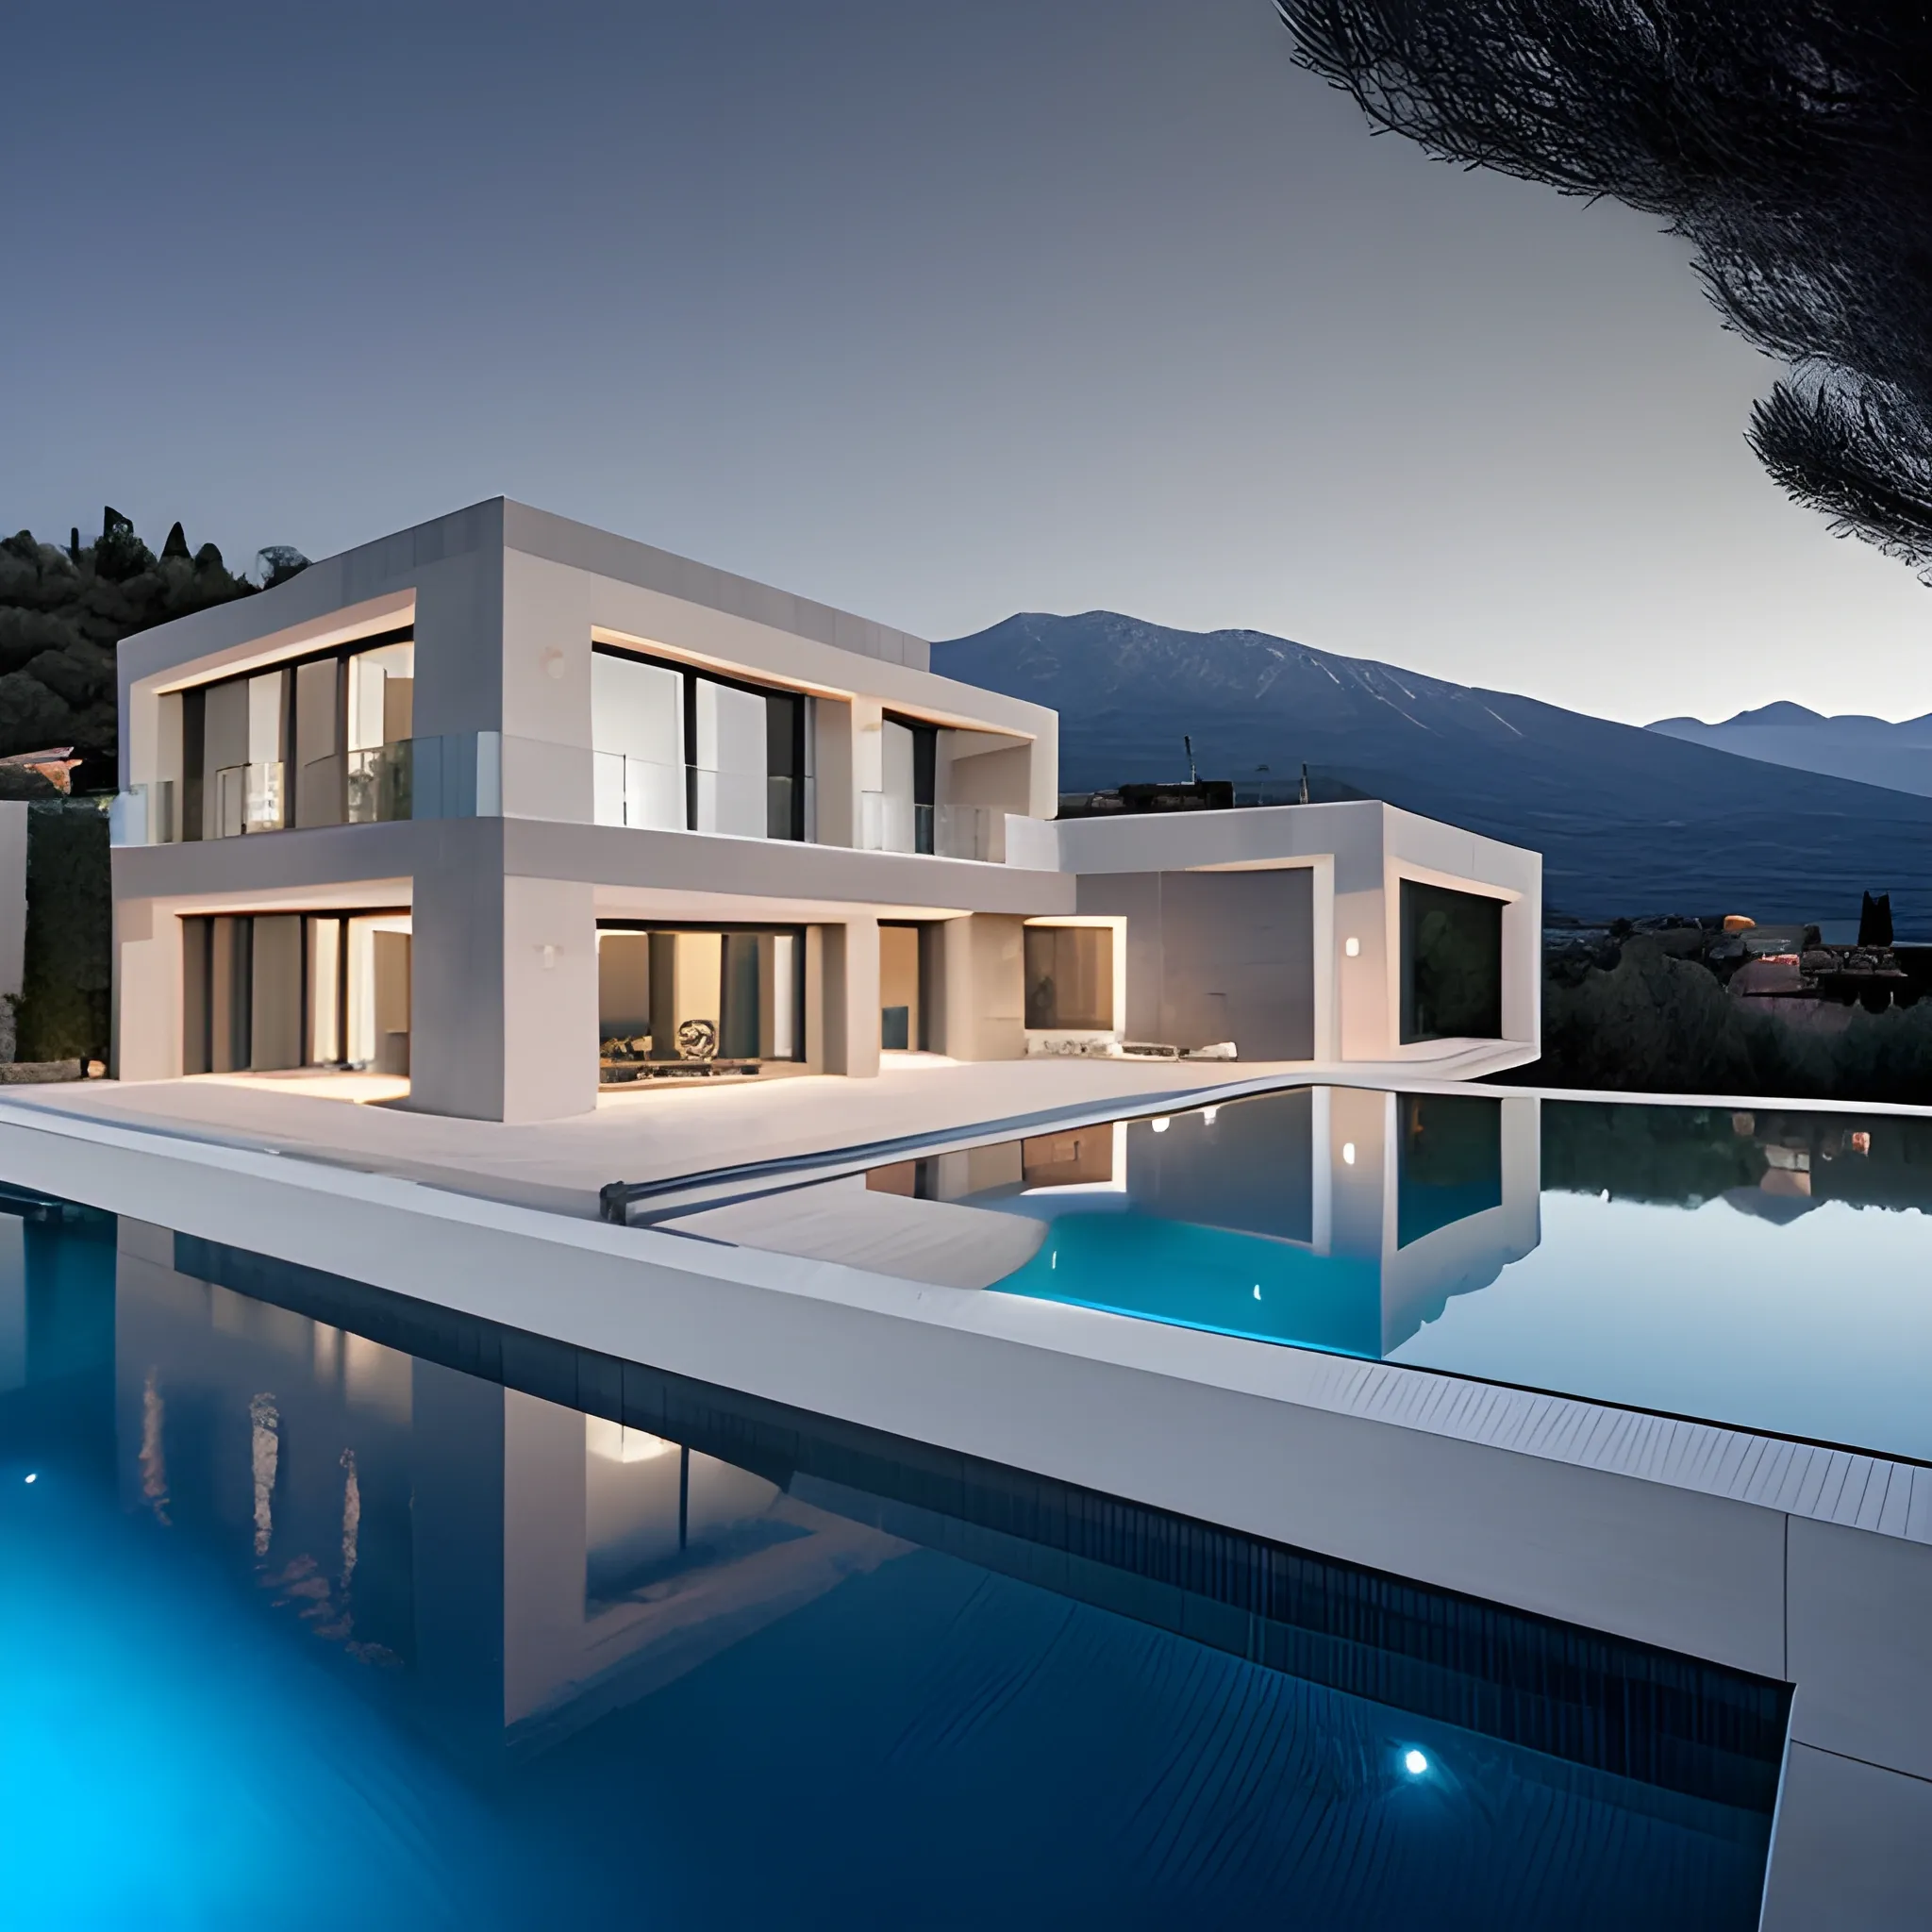 A modern villa in dark grey color with infinity pool overlooking the mount canigou. 
